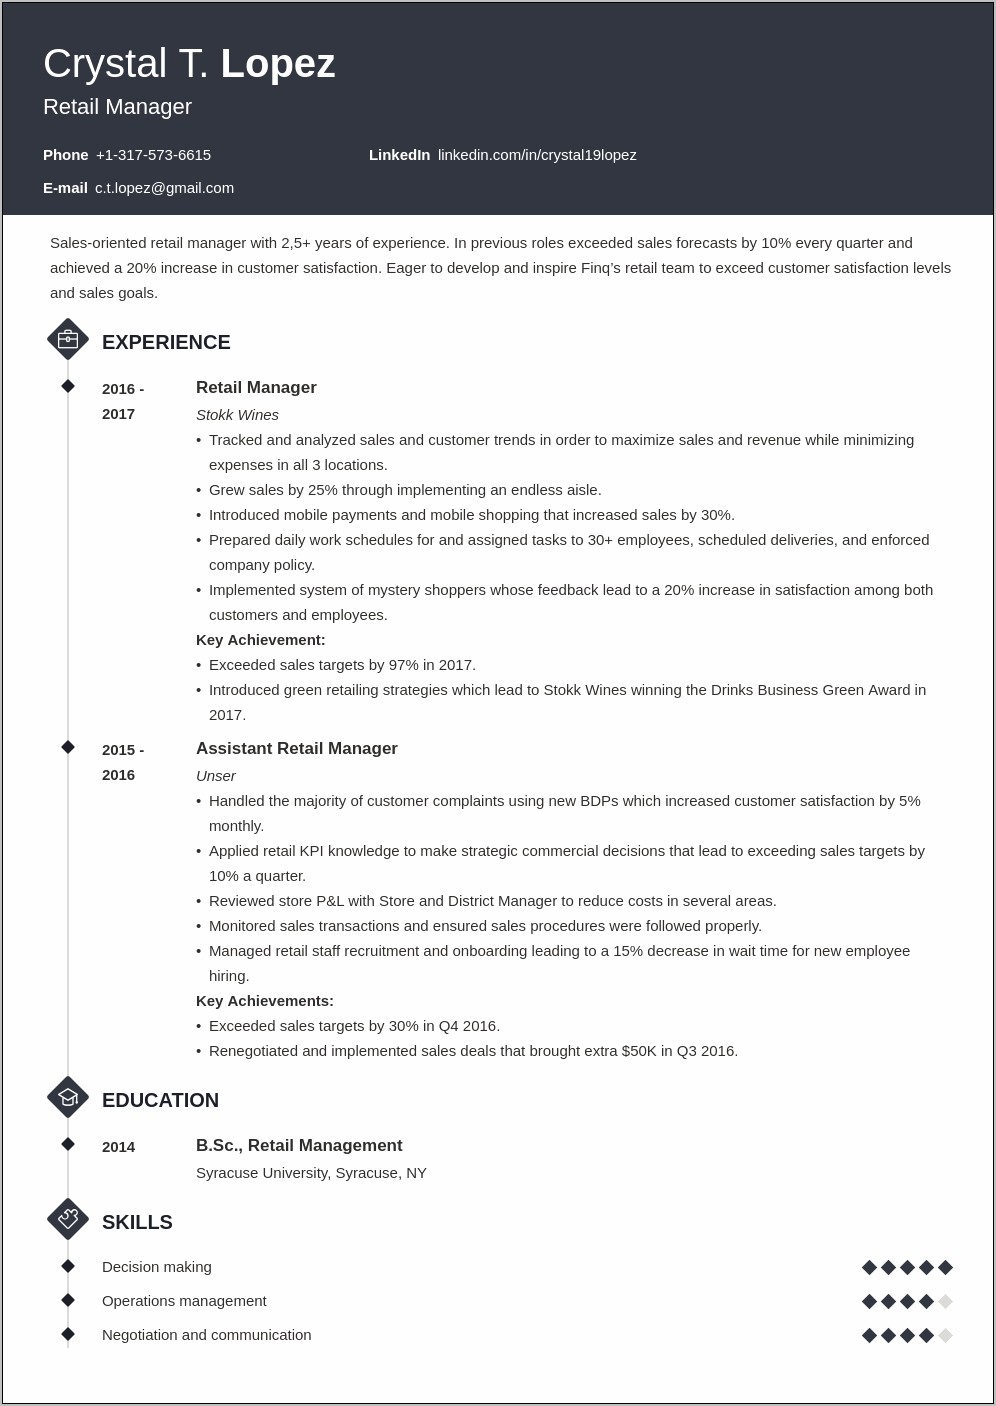 Sample Resume Department Retail Management With Customer Engagement